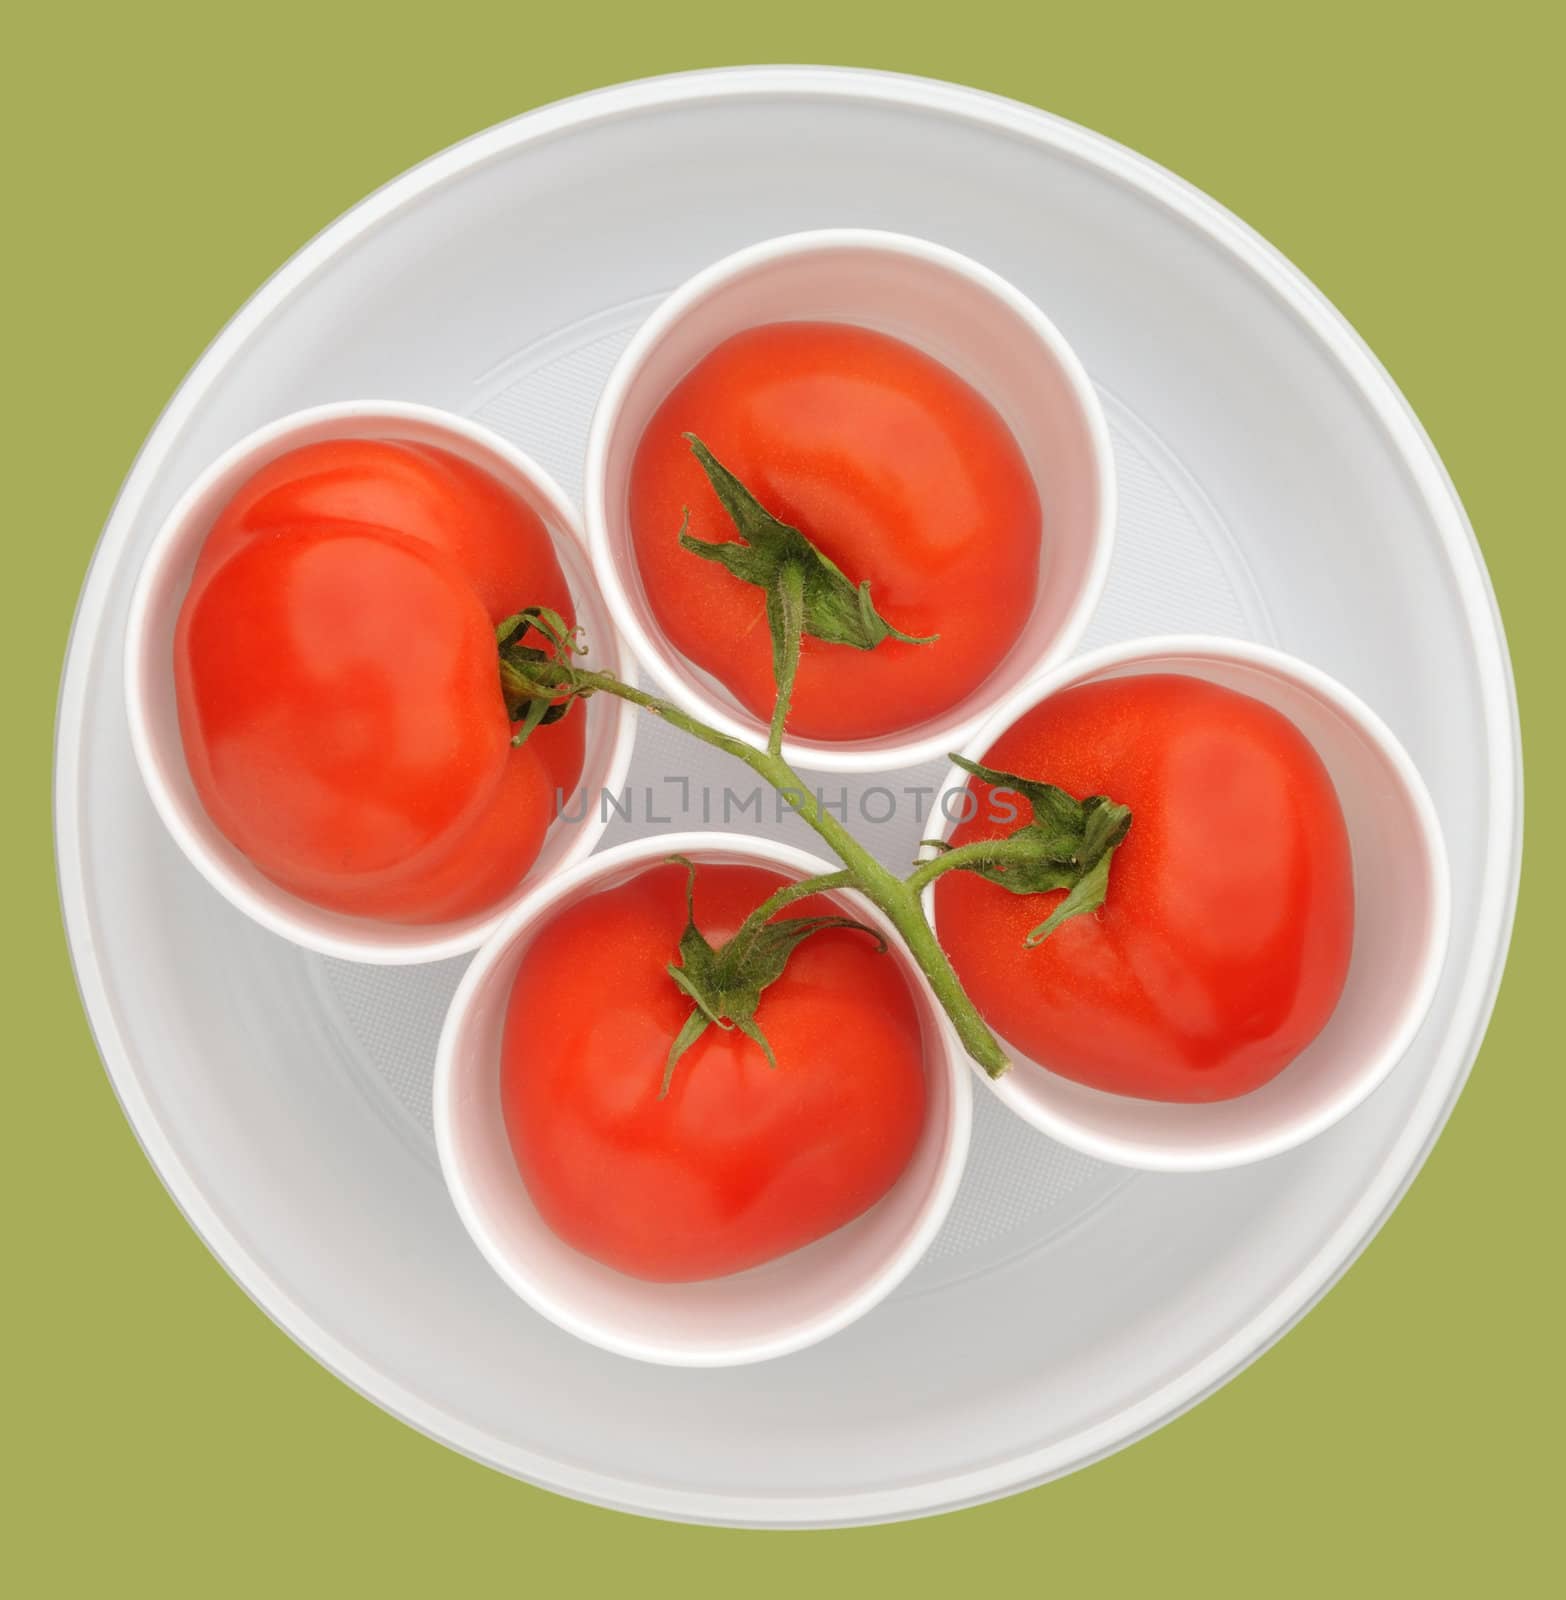 Nice red tomato, fruits in white beakers, clipping path